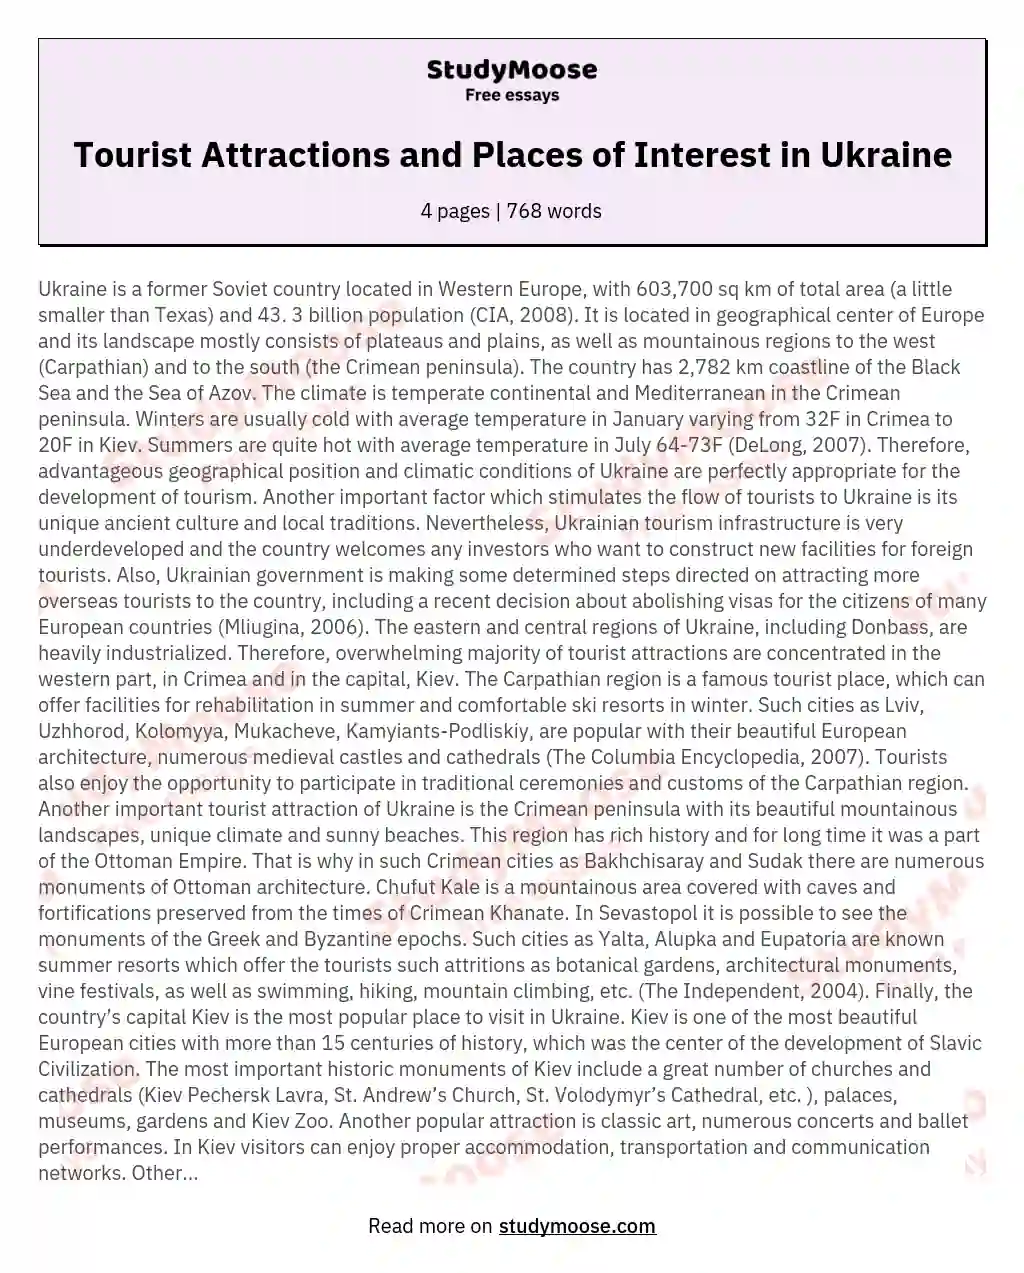 Tourist Attractions and Places of Interest in Ukraine essay